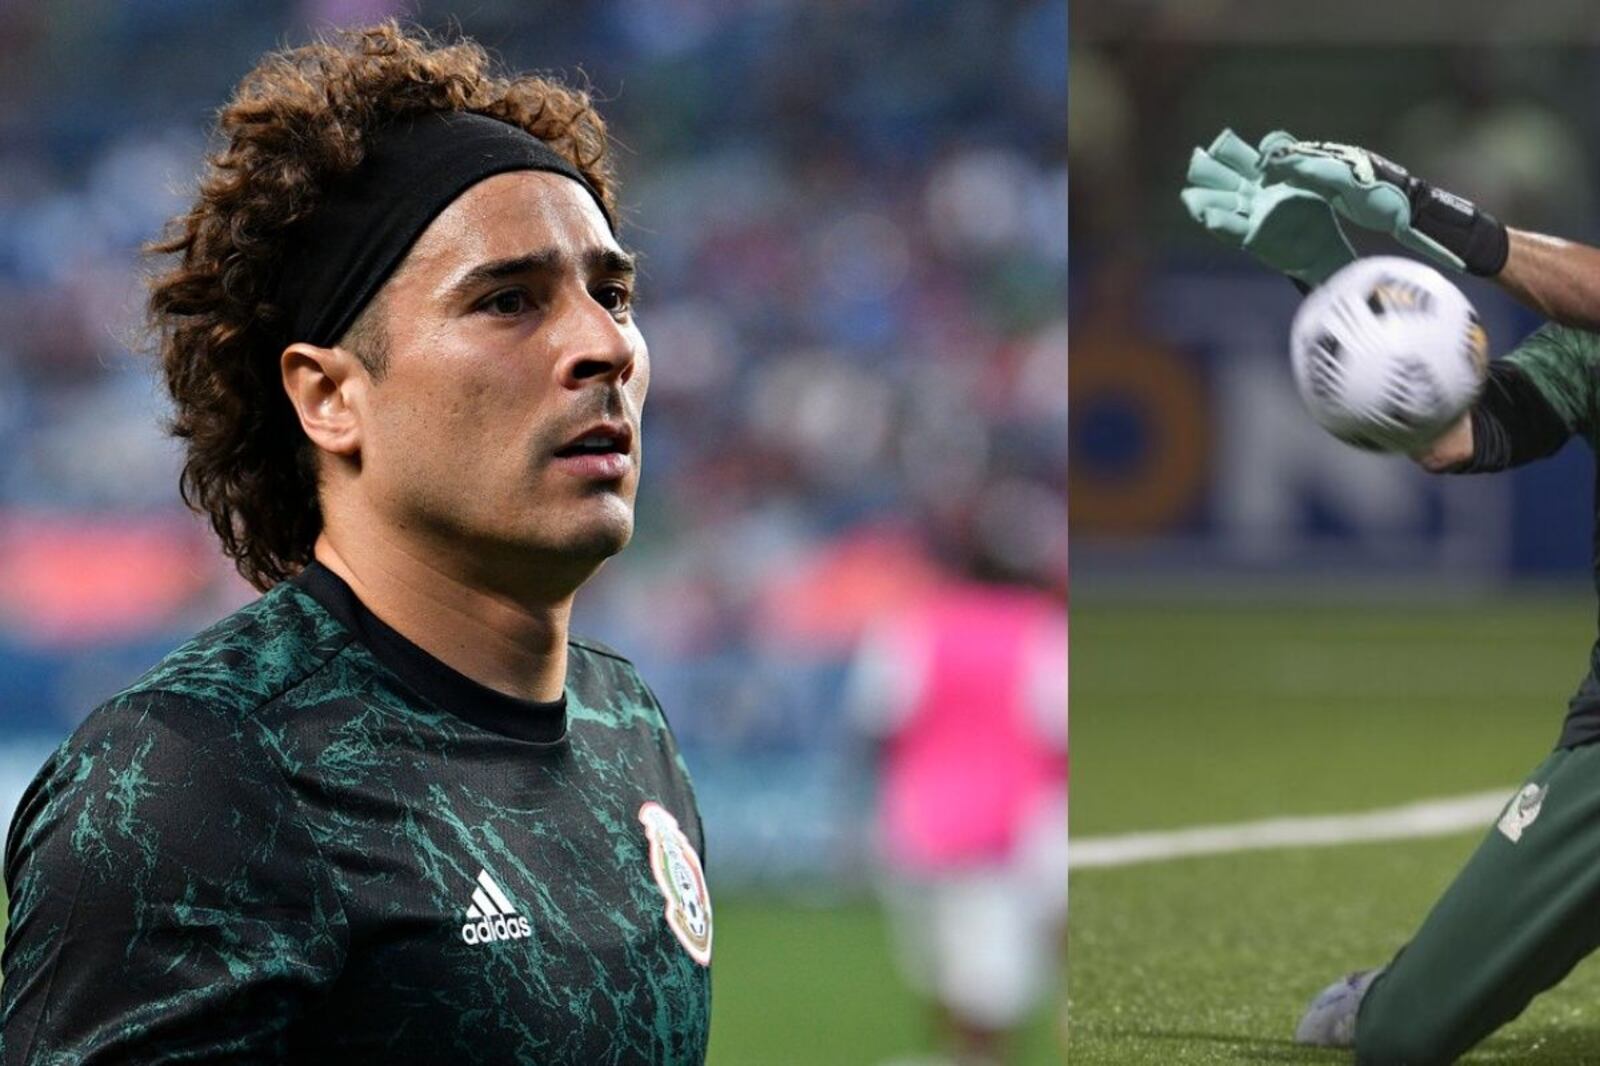 While Ochoa is selfish, the lesson in humility that Carlos Acevedo gave him